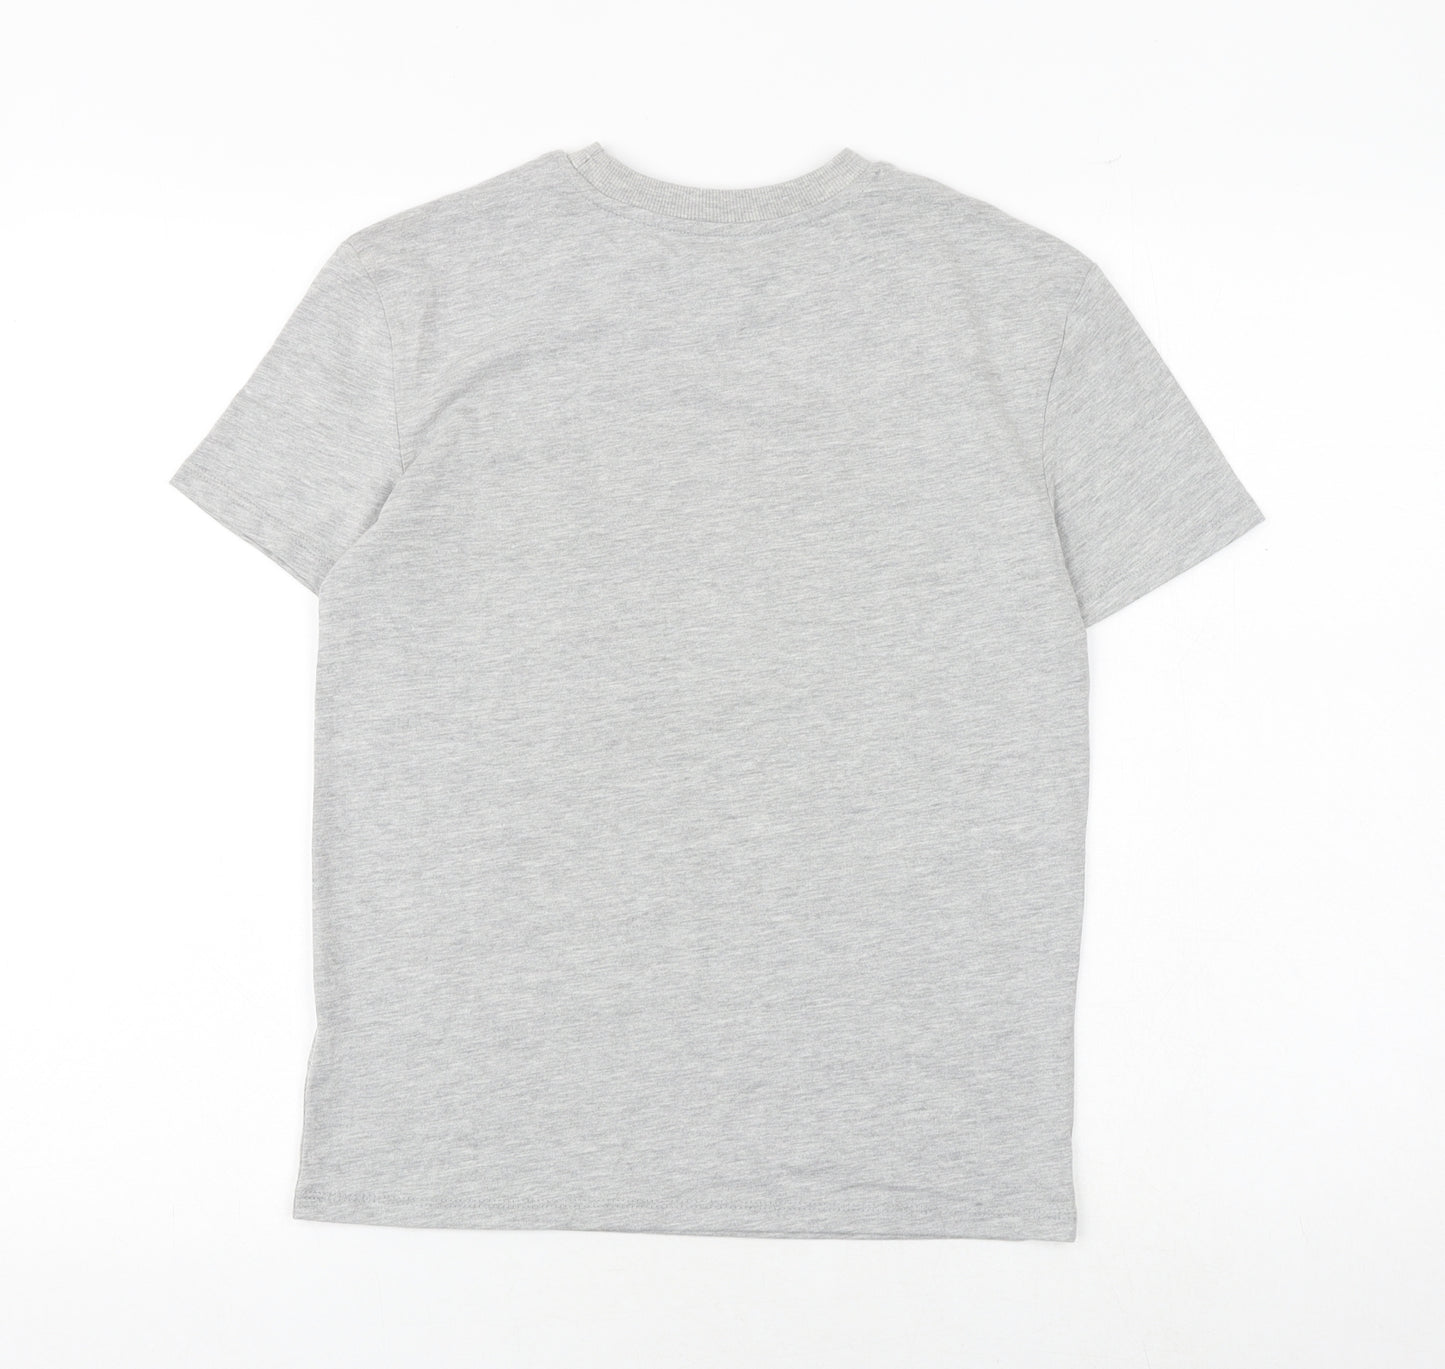 Marks and Spencer Boys Grey Cotton Basic T-Shirt Size 10-11 Years Round Neck Pullover - California U.S.A